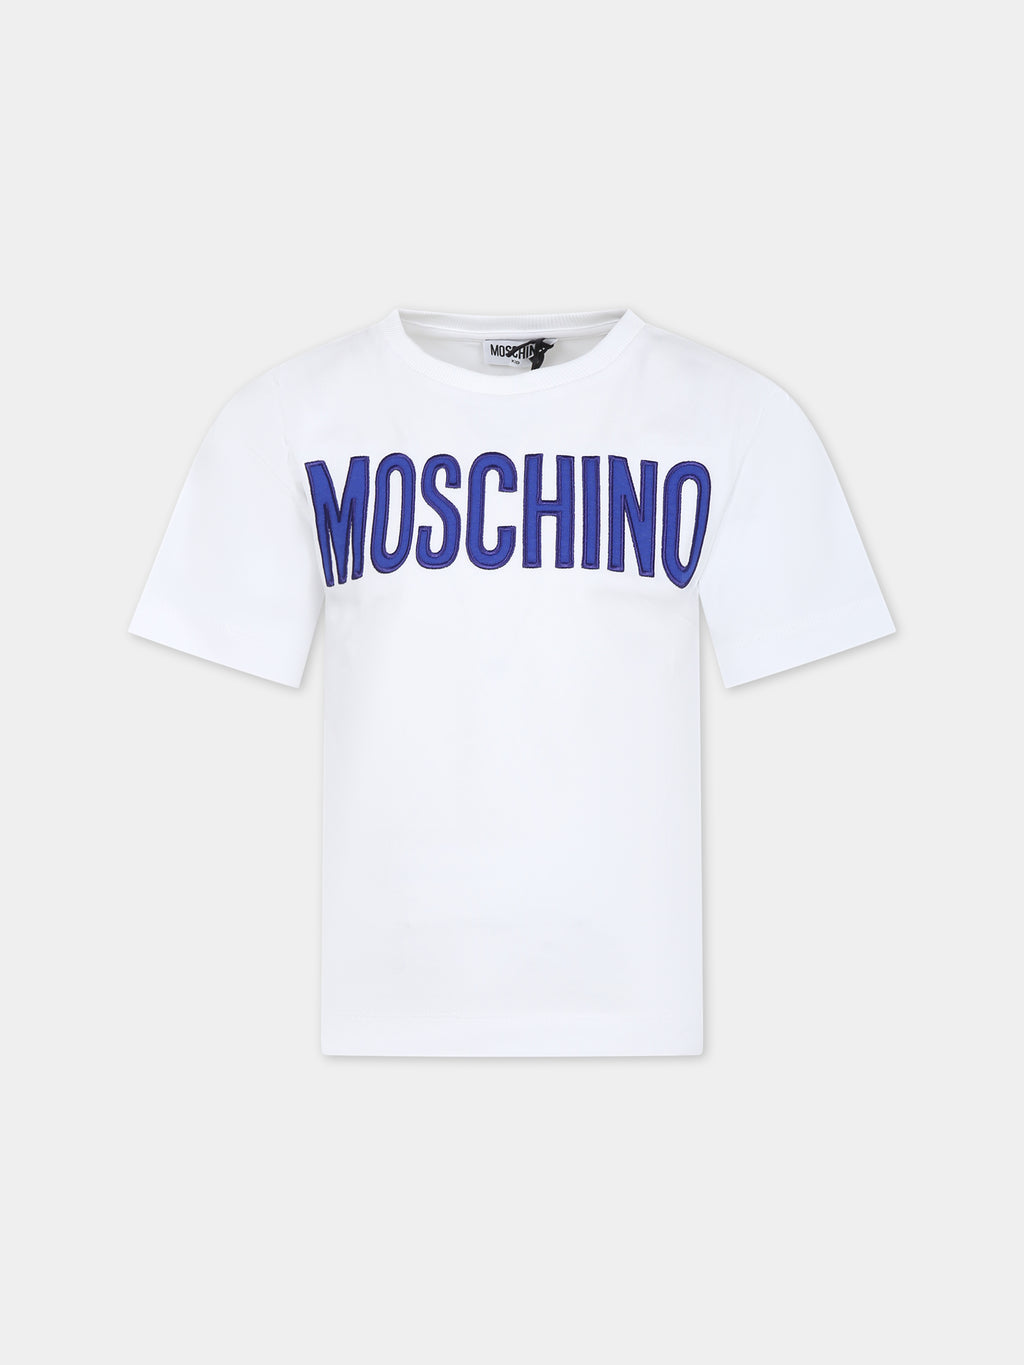 White t-shirt for kids with blue logo